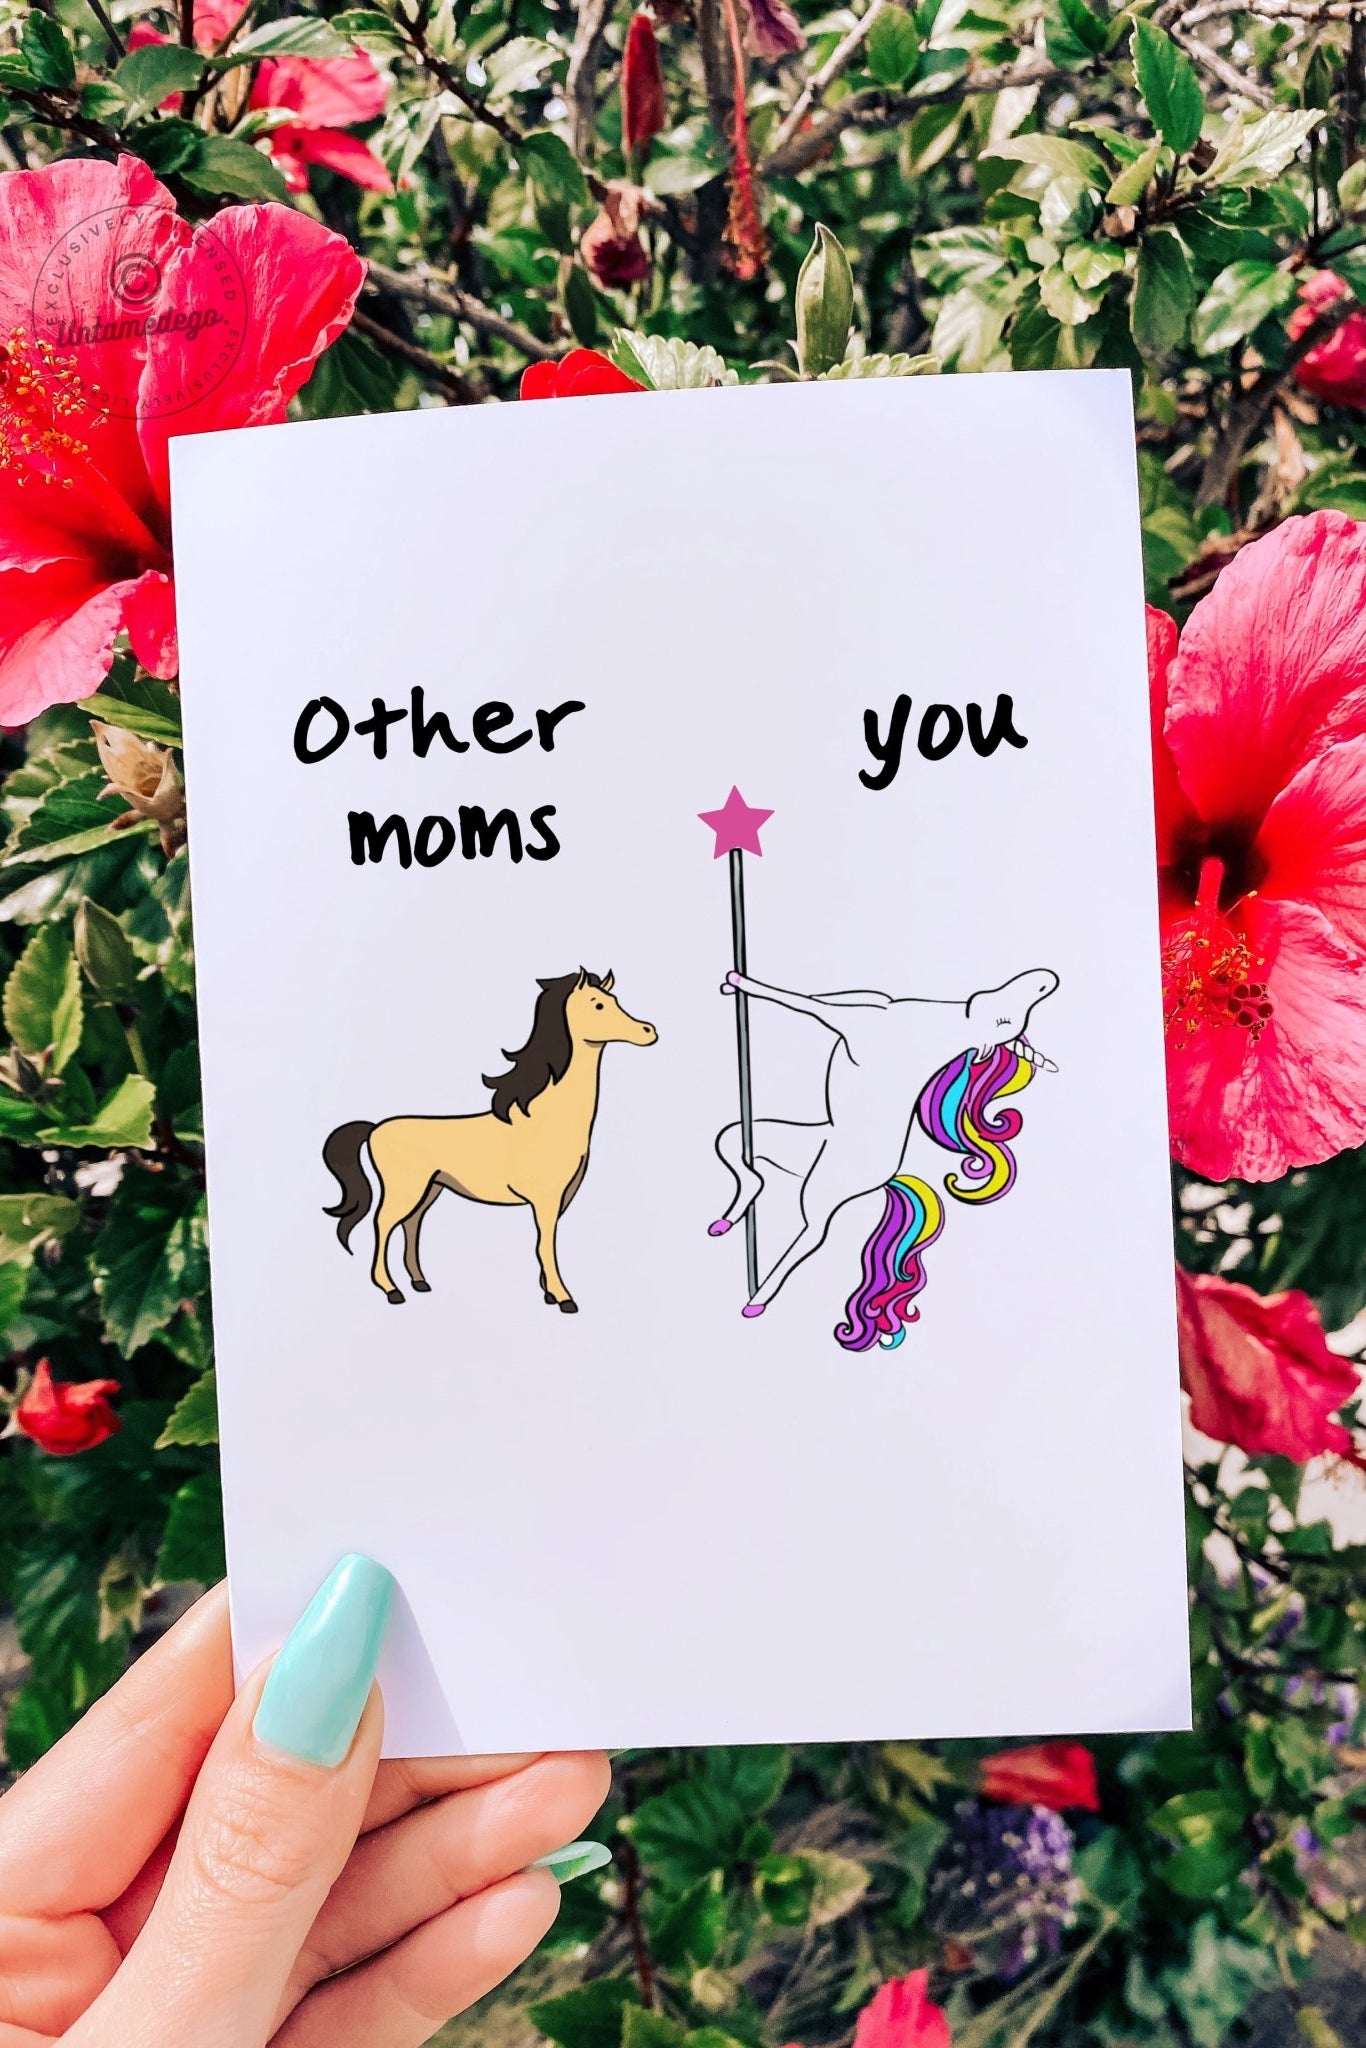 Funny Mother's Day Card- Other Moms Vs You Greeting Card - UntamedEgo LLC.